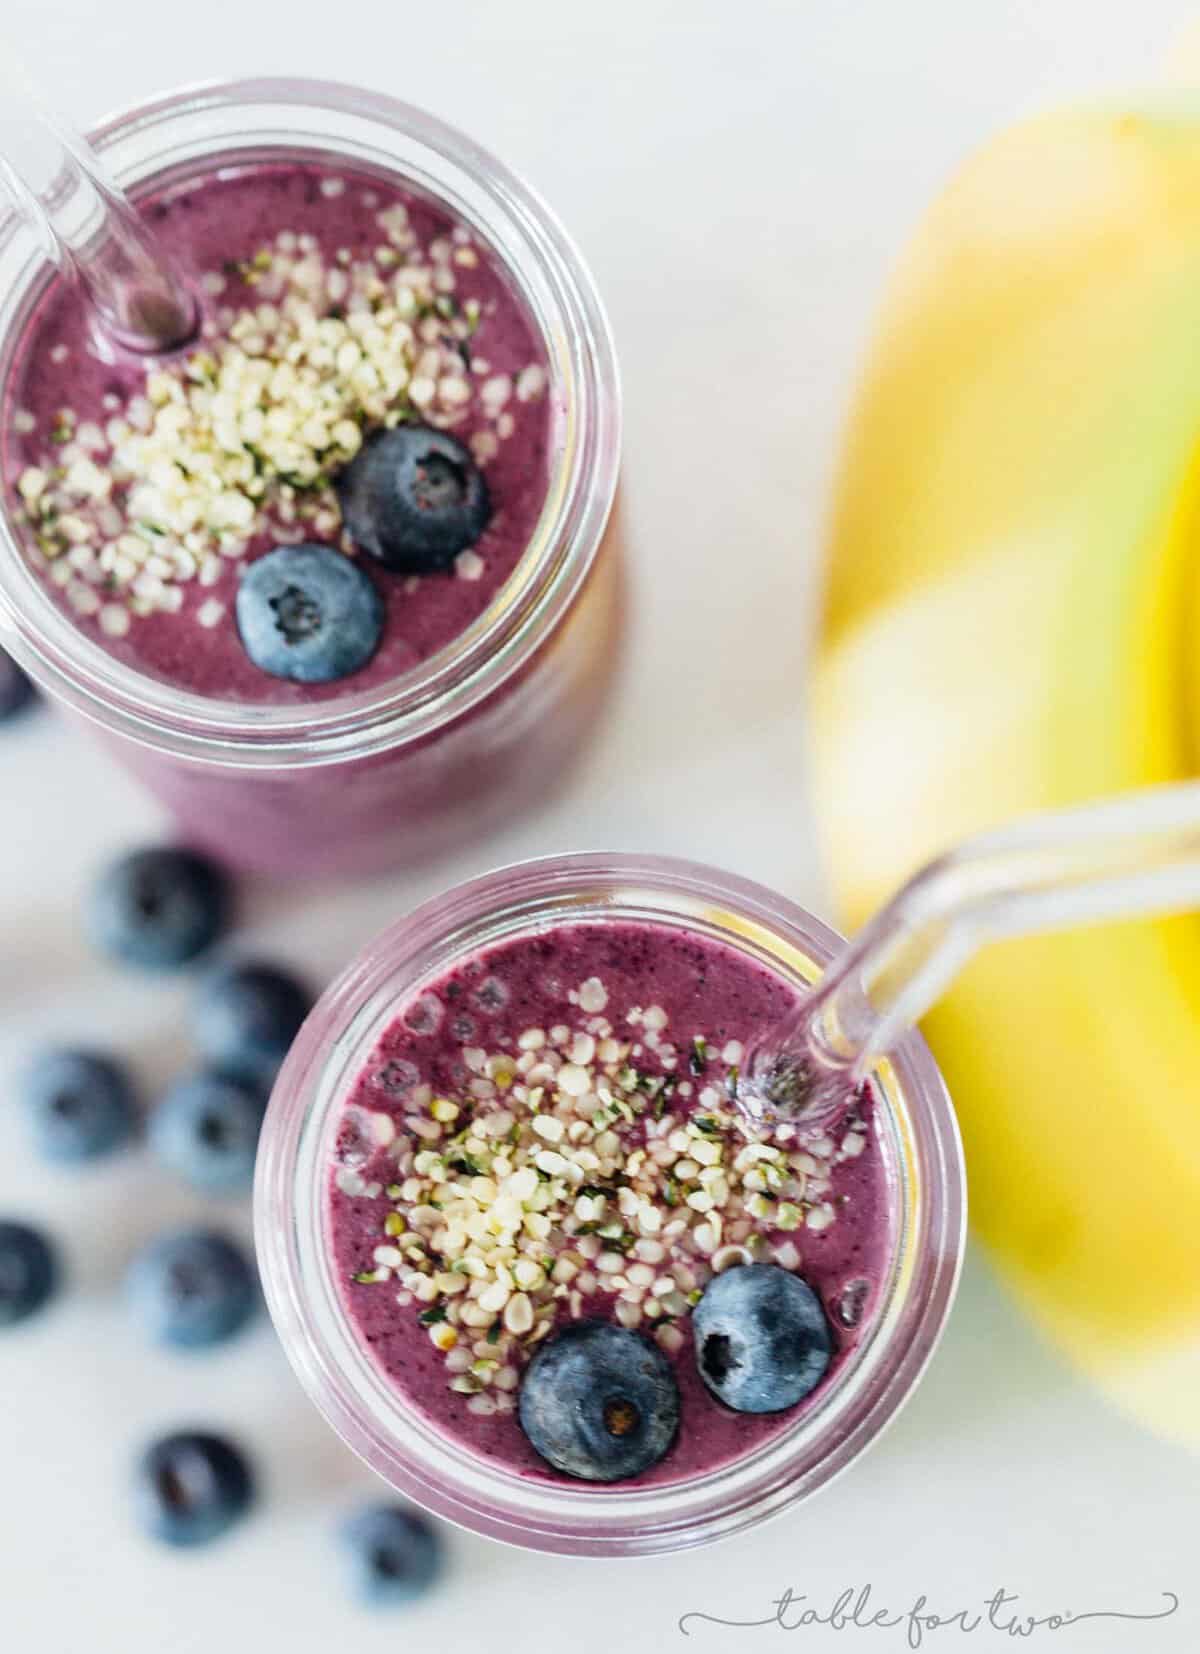 A deliciously decadent and refreshing blueberry banana smoothie to start your day or for a post-workout! This blueberry banana smoothie is packed with antioxidants and loads of healthy nutrients to get you through your day!